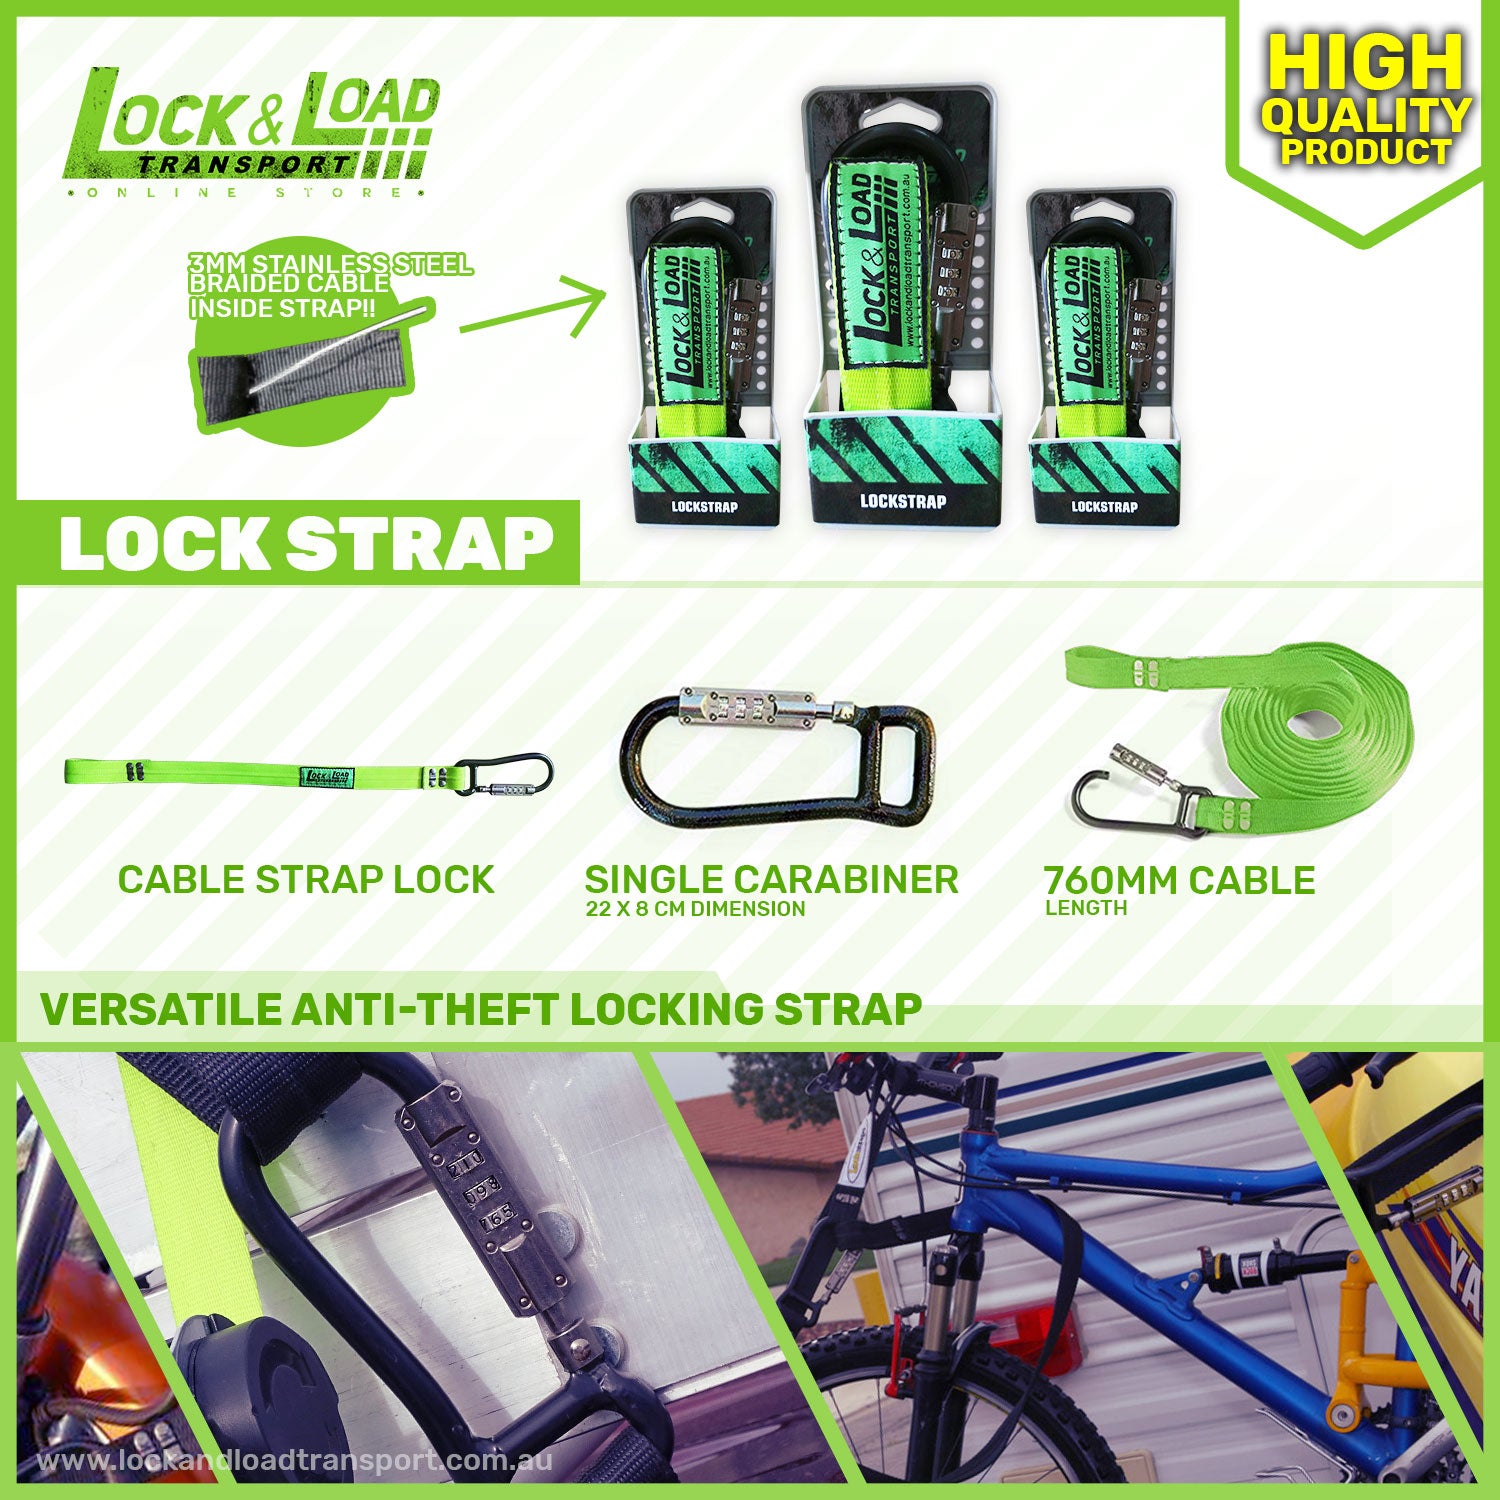 Lock and Load New Product - Lockstrap on its way to our store. Pre-order now!